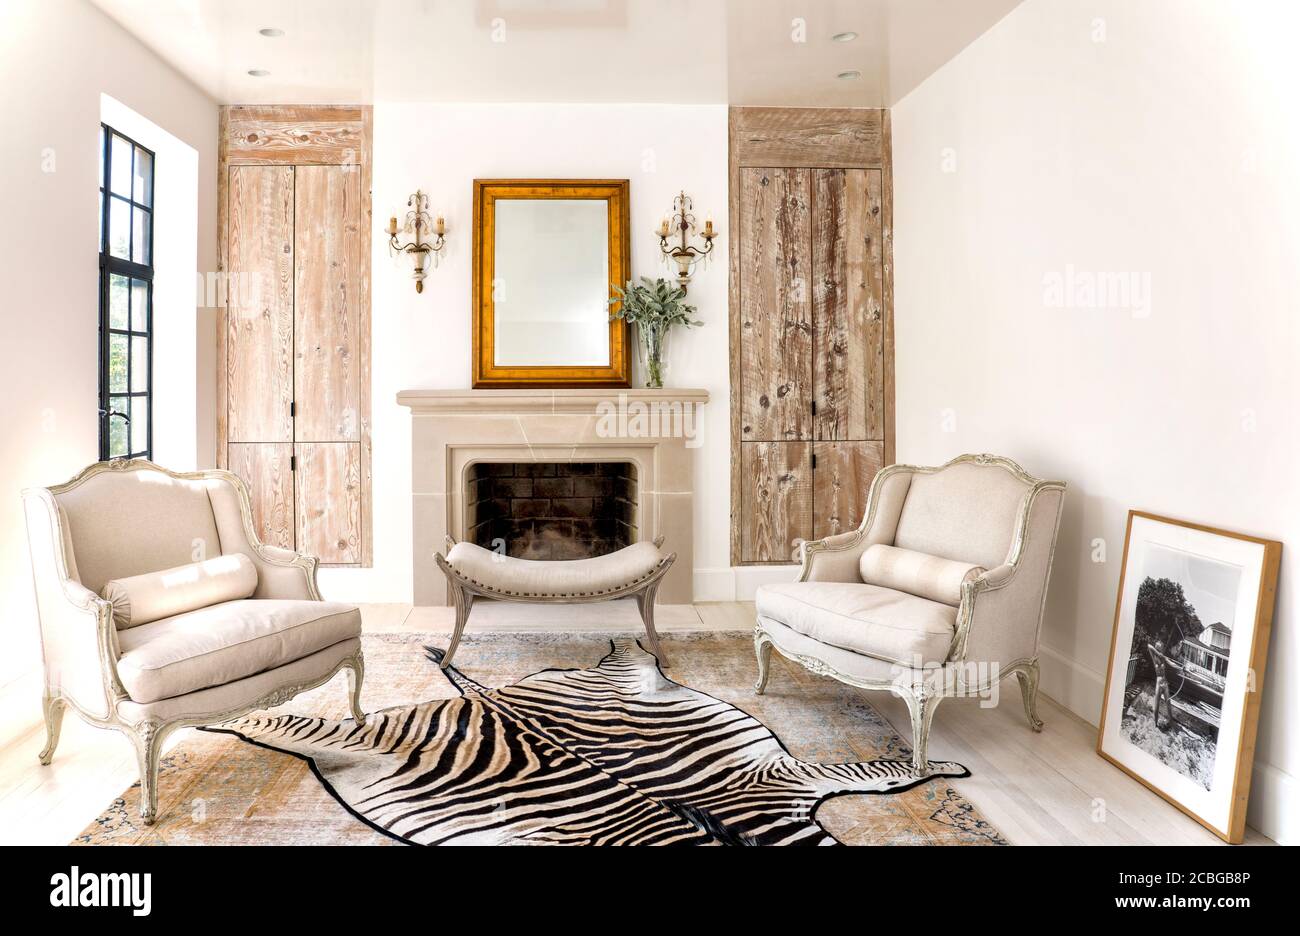 Neutral colored sitting room Stock Photo